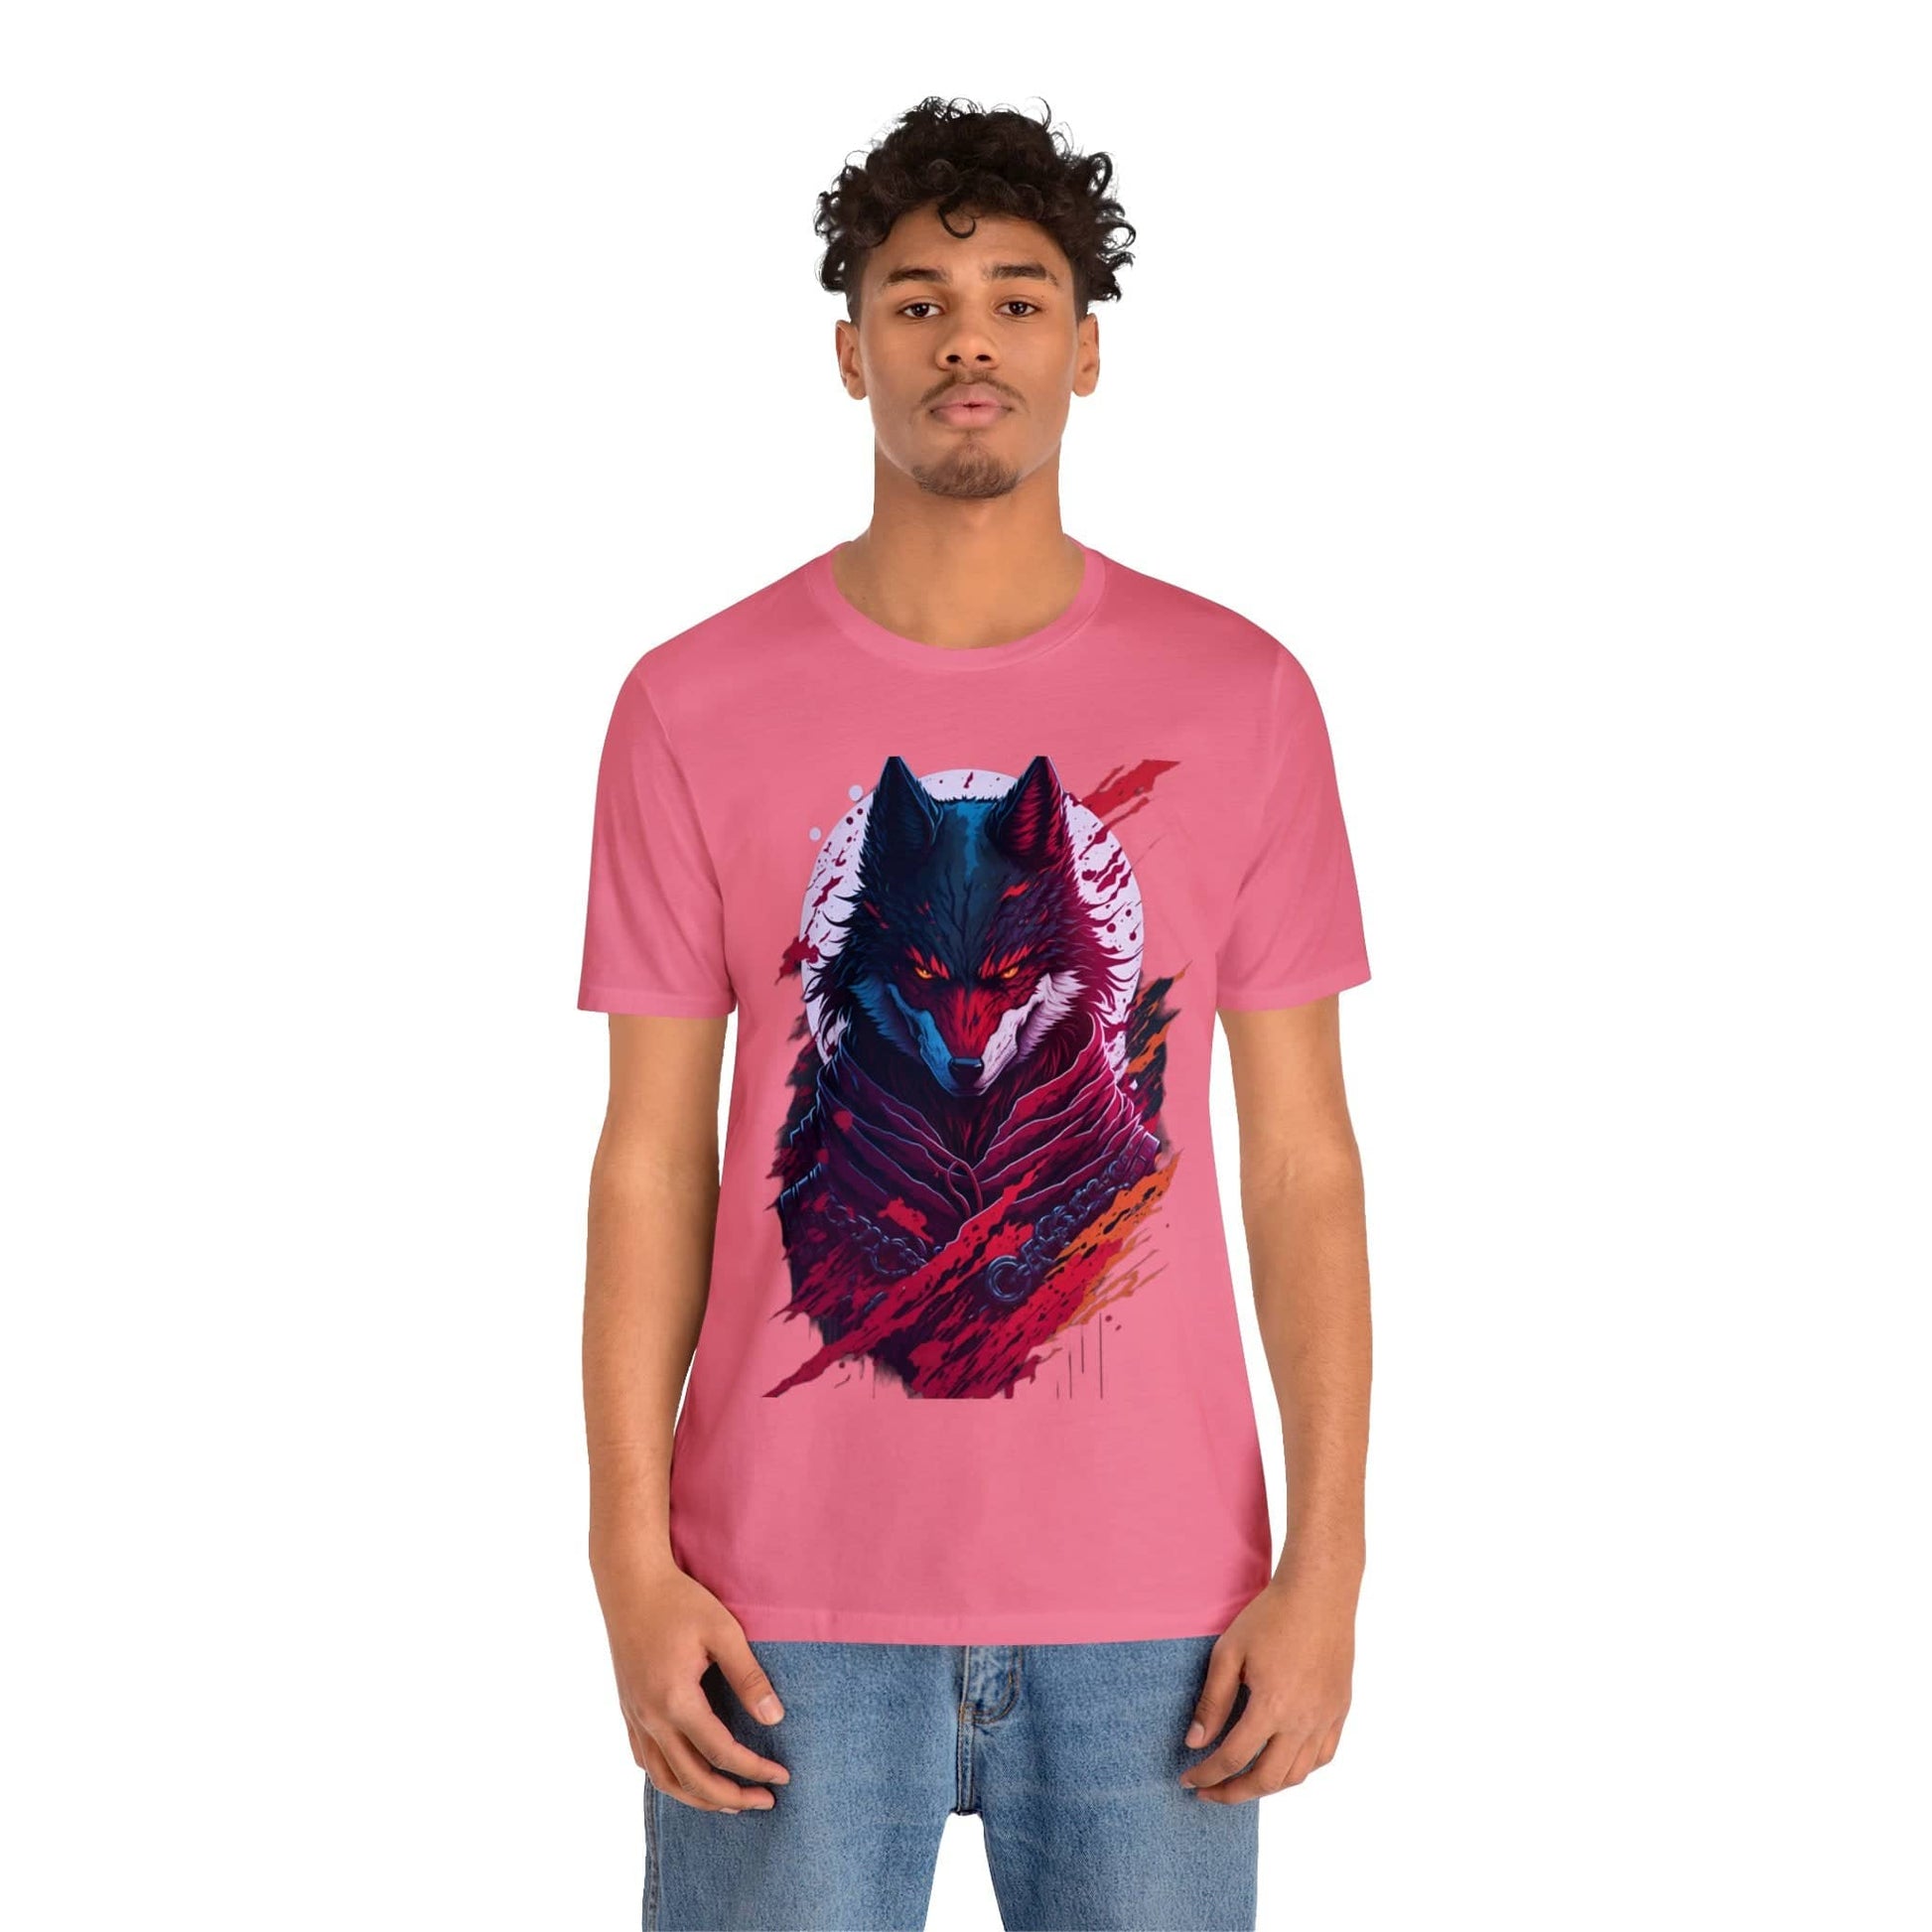 "Alex Hart: Unique T-Shirt Designs, American Design, Express Style Boldly, Fashion Trends, Personal Style, Exclusive Offers" T-Shirt Bigger Than Life Charity Pink S 